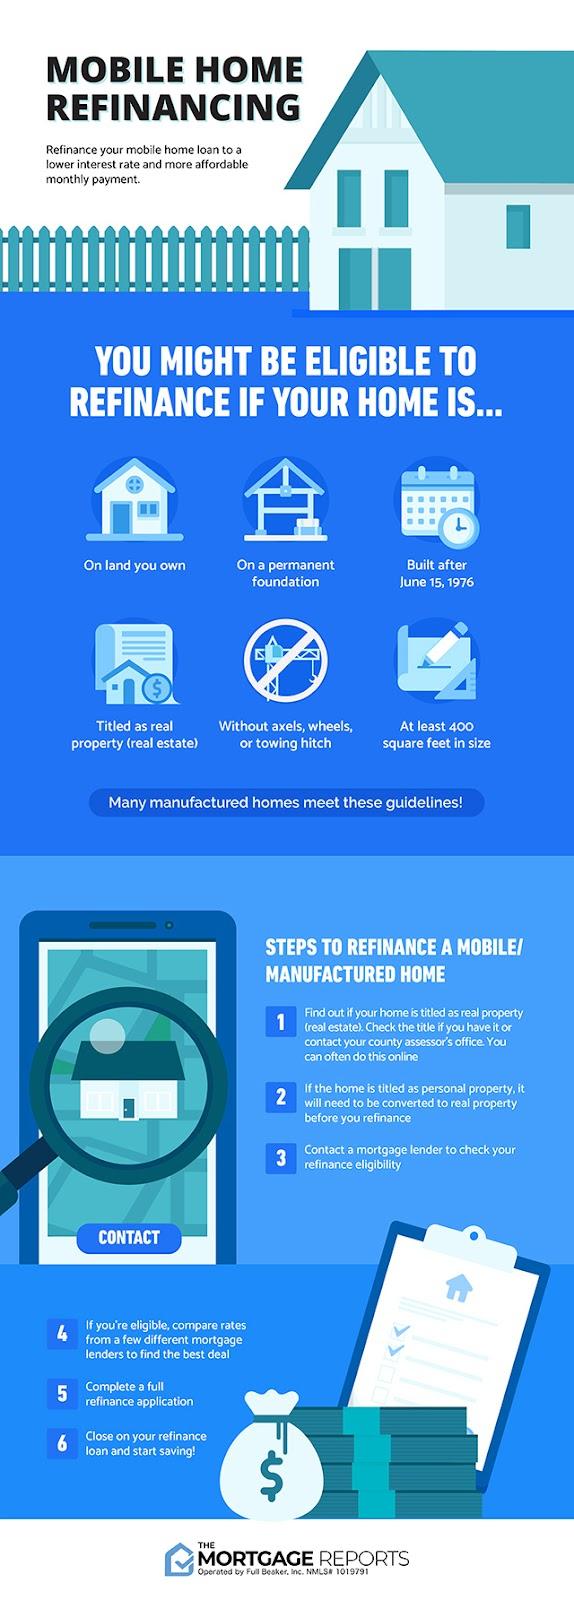 Infographic on mobile home refinancing. You might be eligible to refinance a mobile home if it's on a permanent foundation, on land you own, and at least 400 square feet in size. 